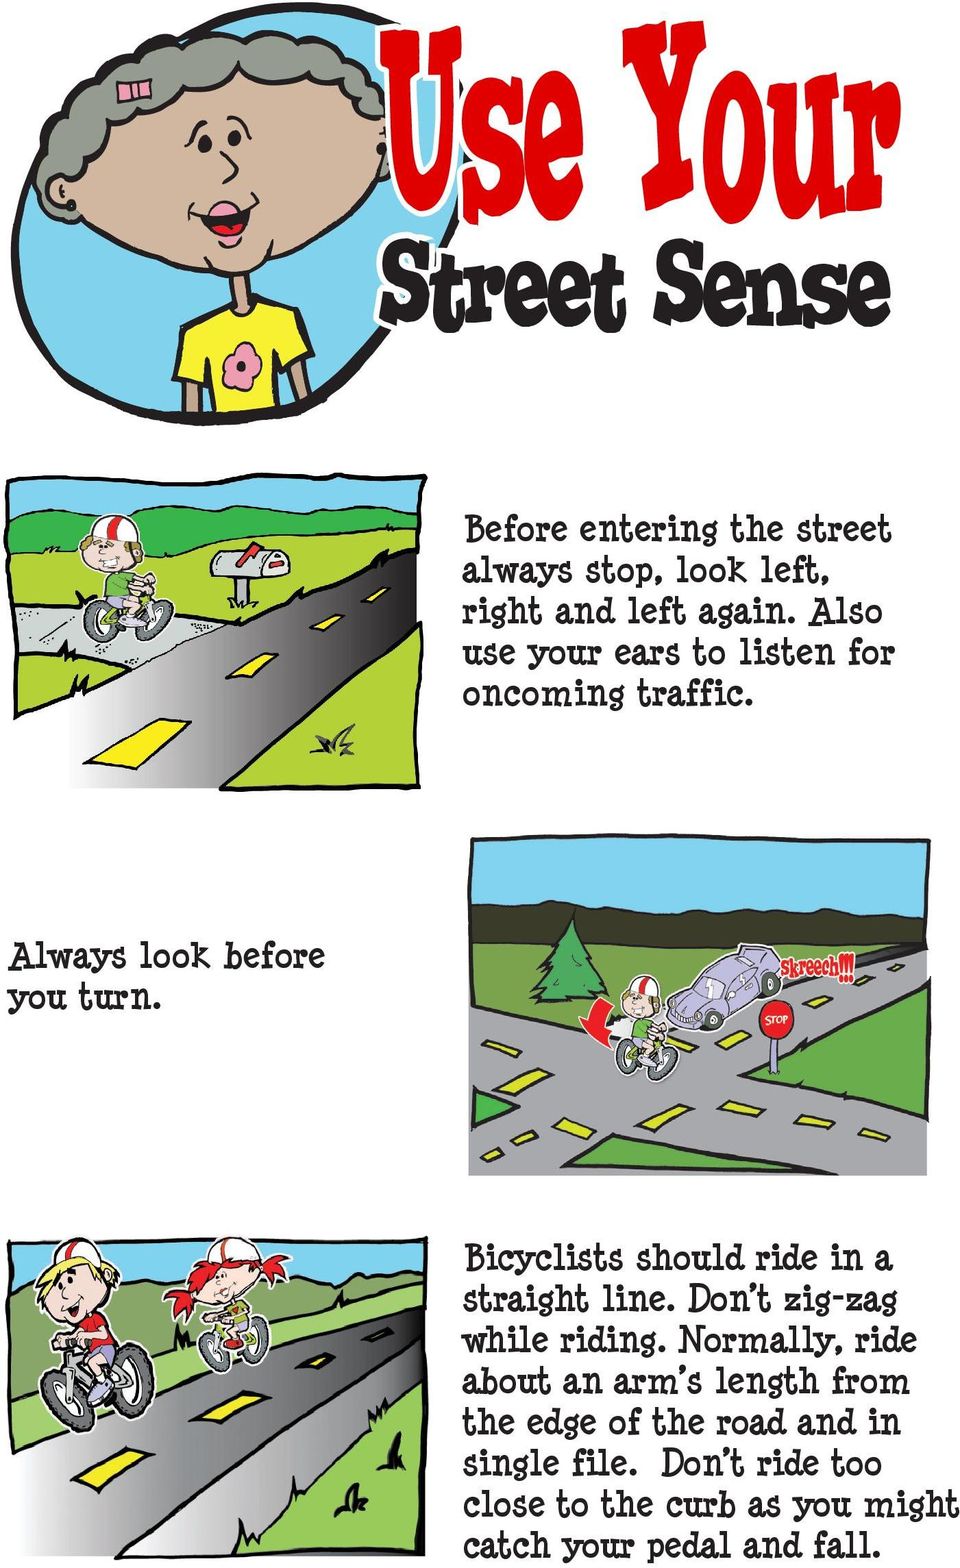 Bicyclists should ride in a straight line. Don t zig-zag while riding.